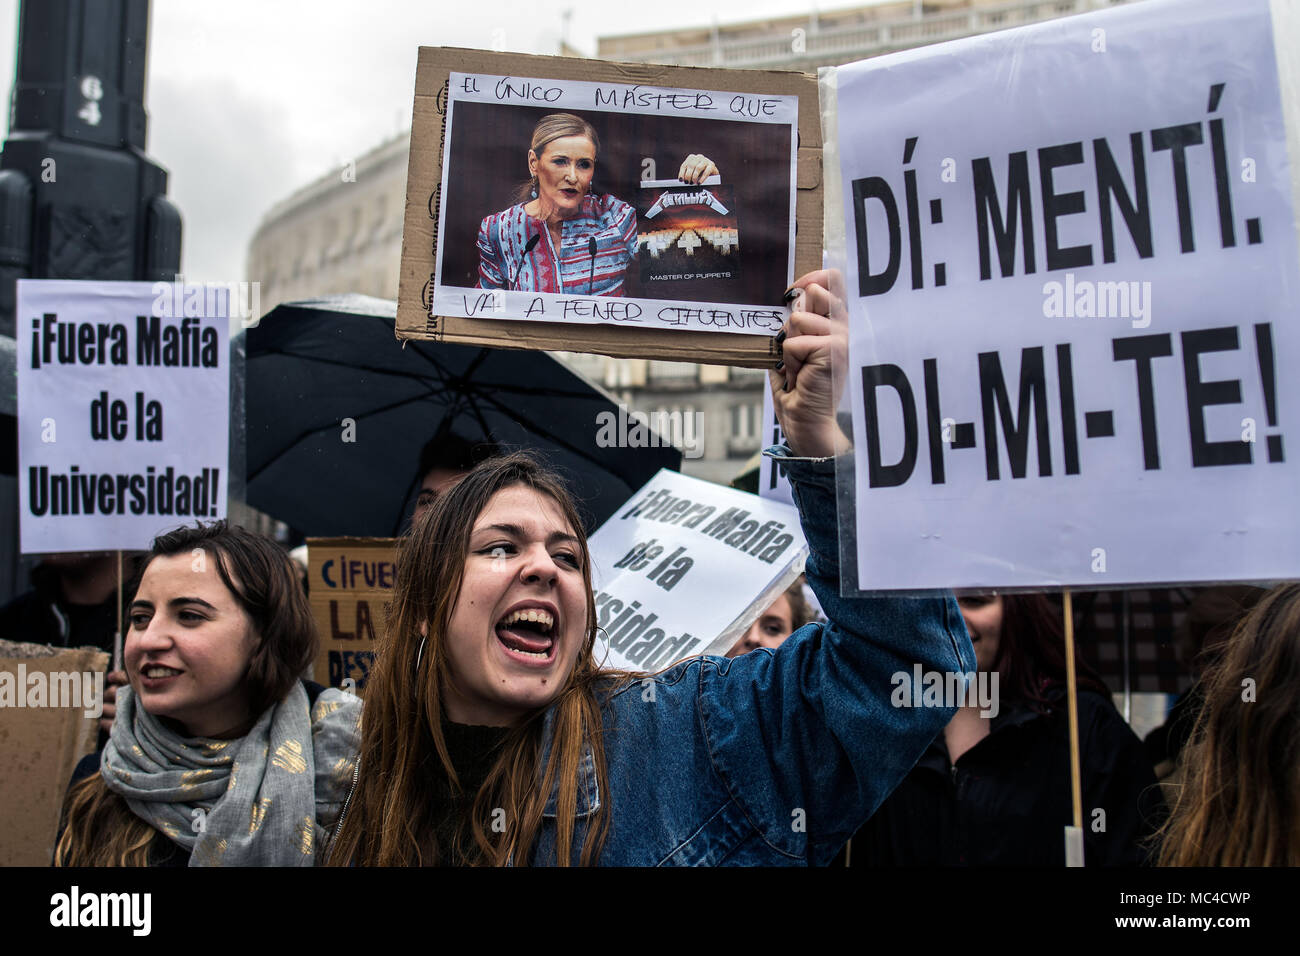 Madrid, Spain. 12th Apr, 2018. Students of Rey Juan Carlos University protest calling for the resignation of the president of the Community of Madrid Cristina Cifuentes and for the rector of the university, Javier Ramos, for the scandal of the supposed false degree of Cifuentes, in Madrid, Spain. Credit: Marcos del Mazo/Alamy Live News Stock Photo